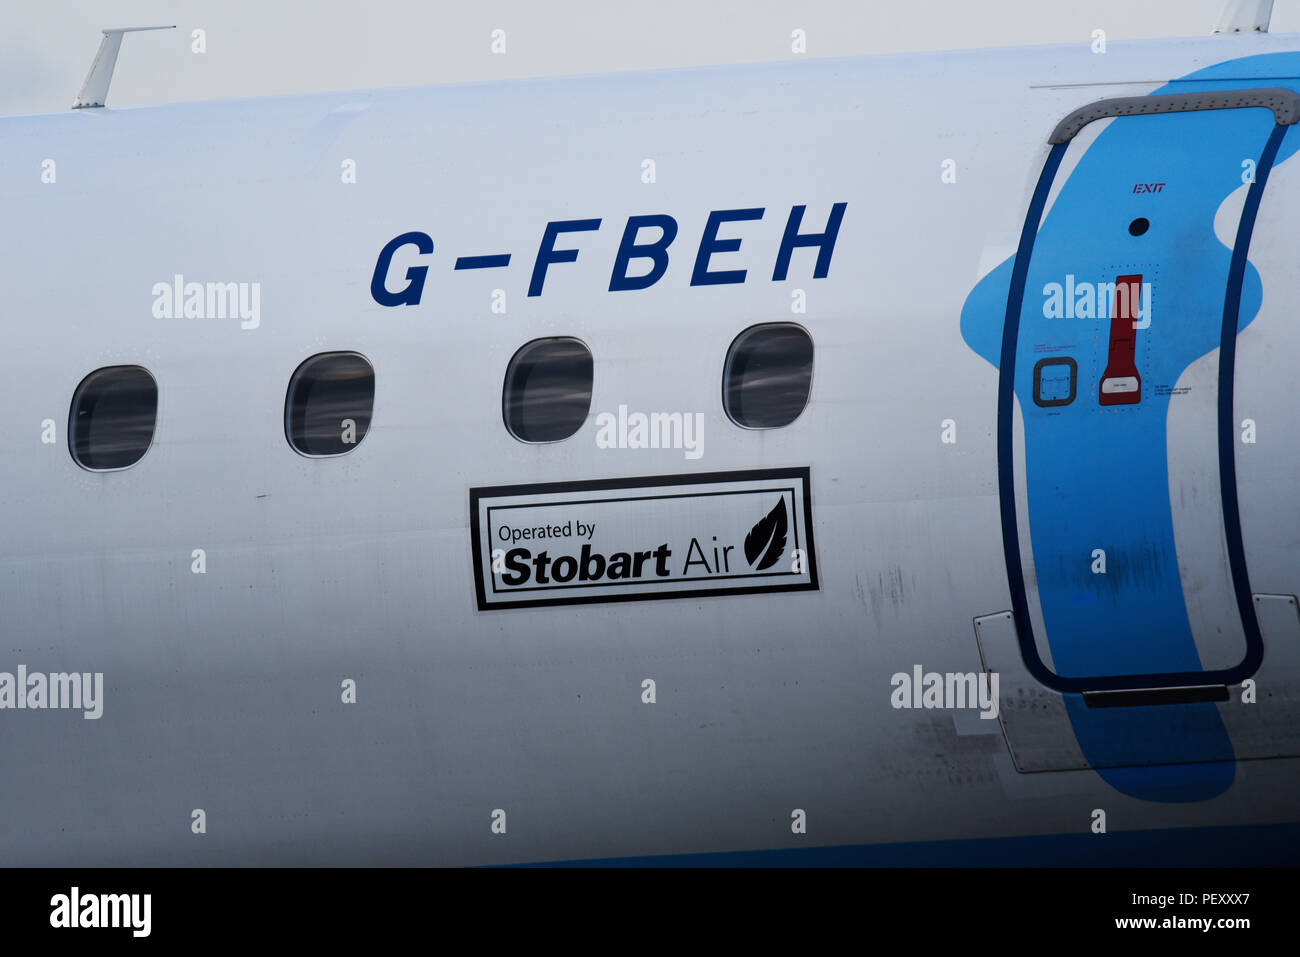 FlyBe Embraer E195 airliner aircraft plane services operated by Stobart Air. Notice. Sign. Exit door. Fuselage side. G-FBEH Stock Photo